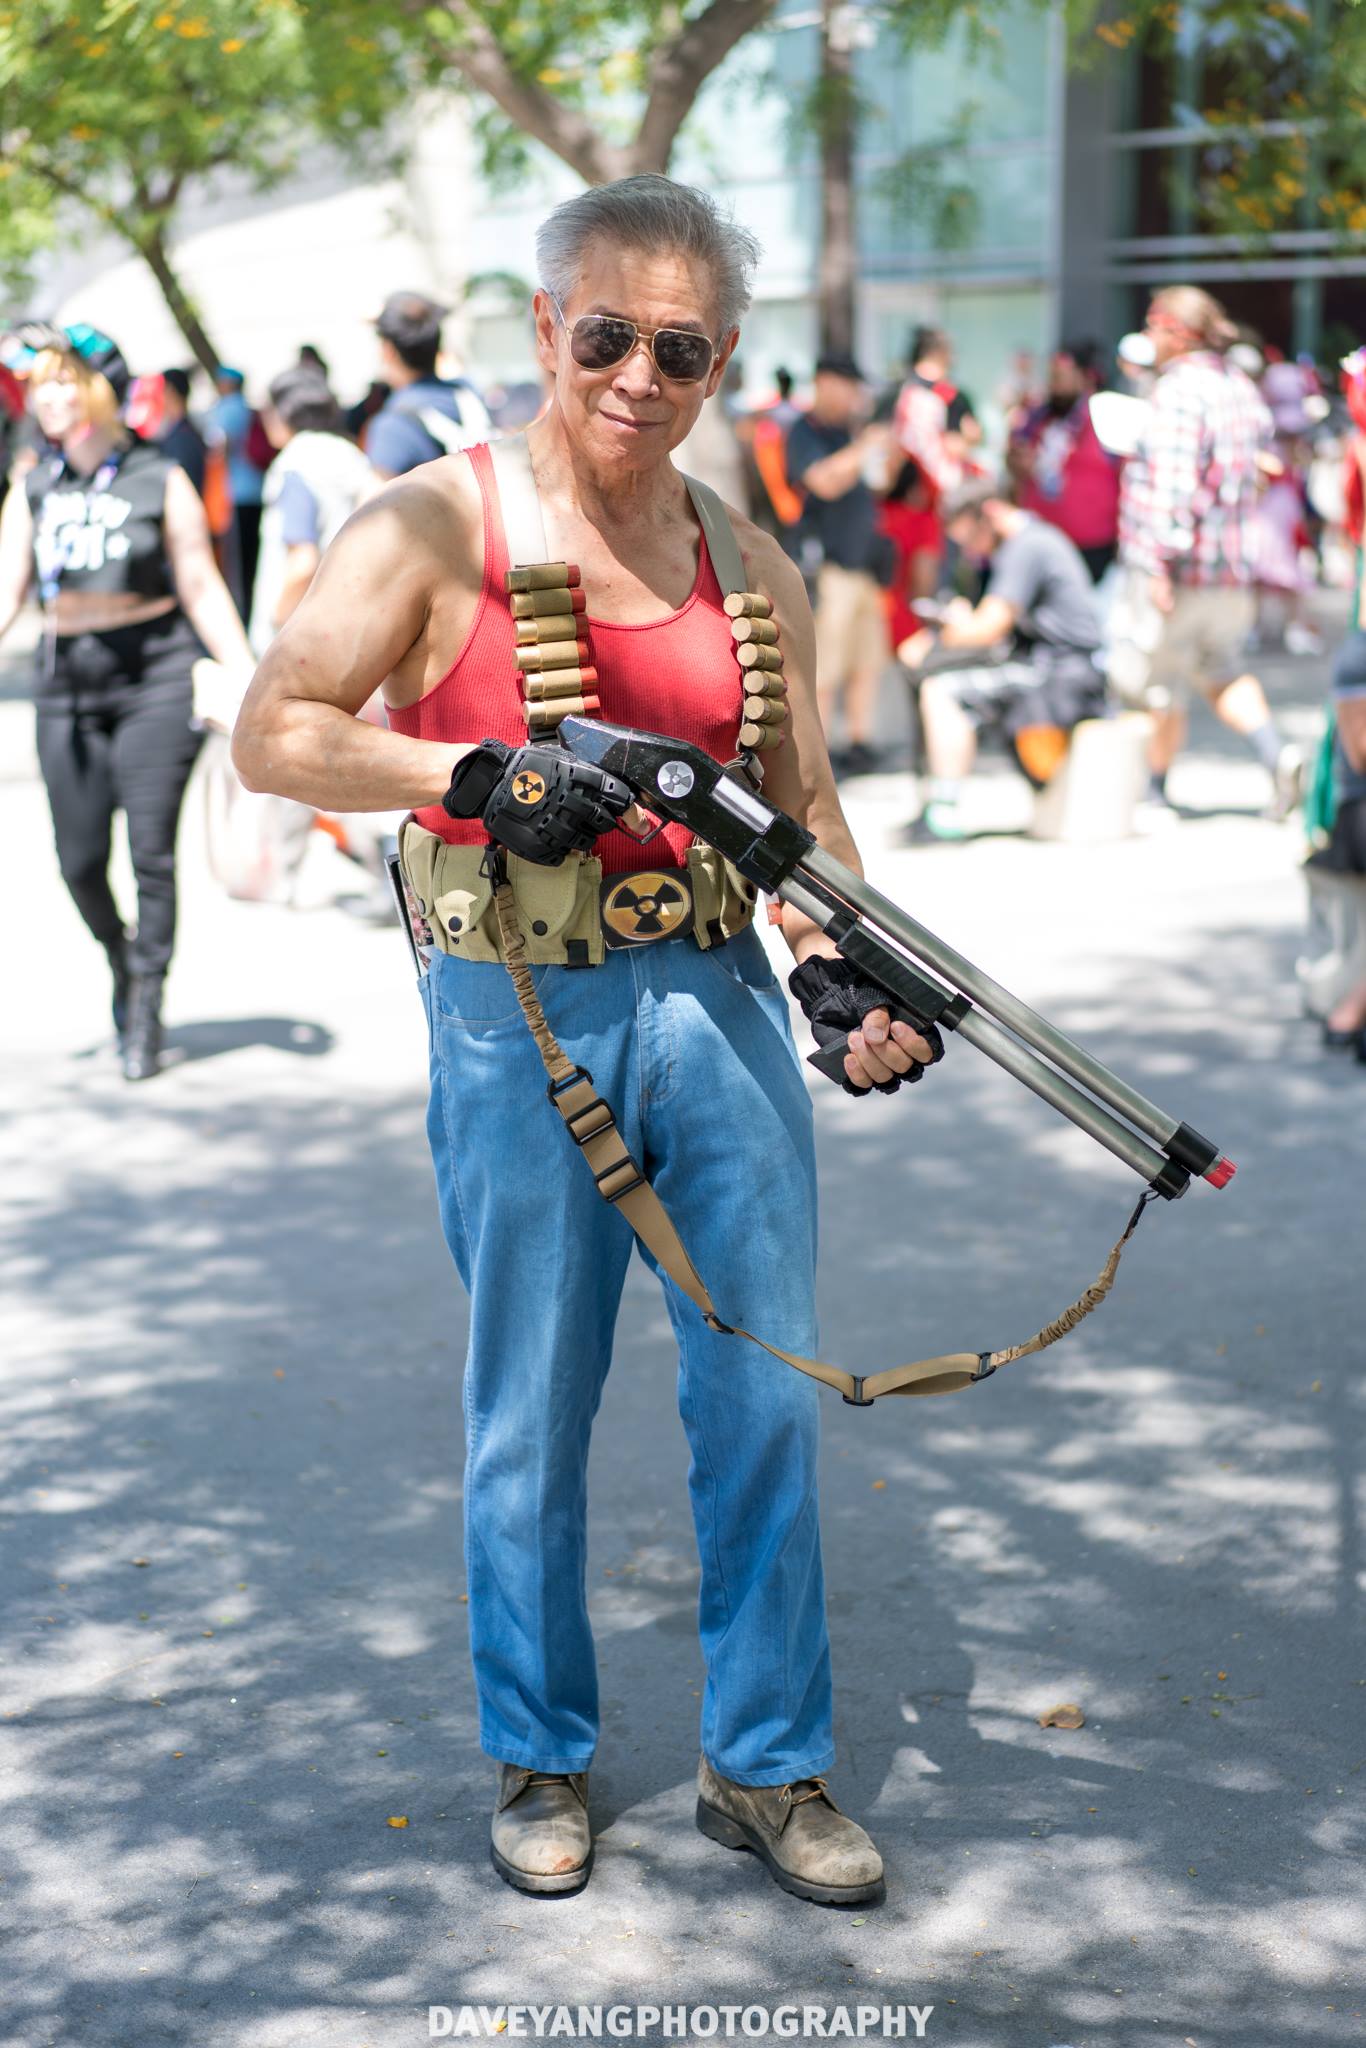 The Best Cosplay From America’s Biggest Anime Convention